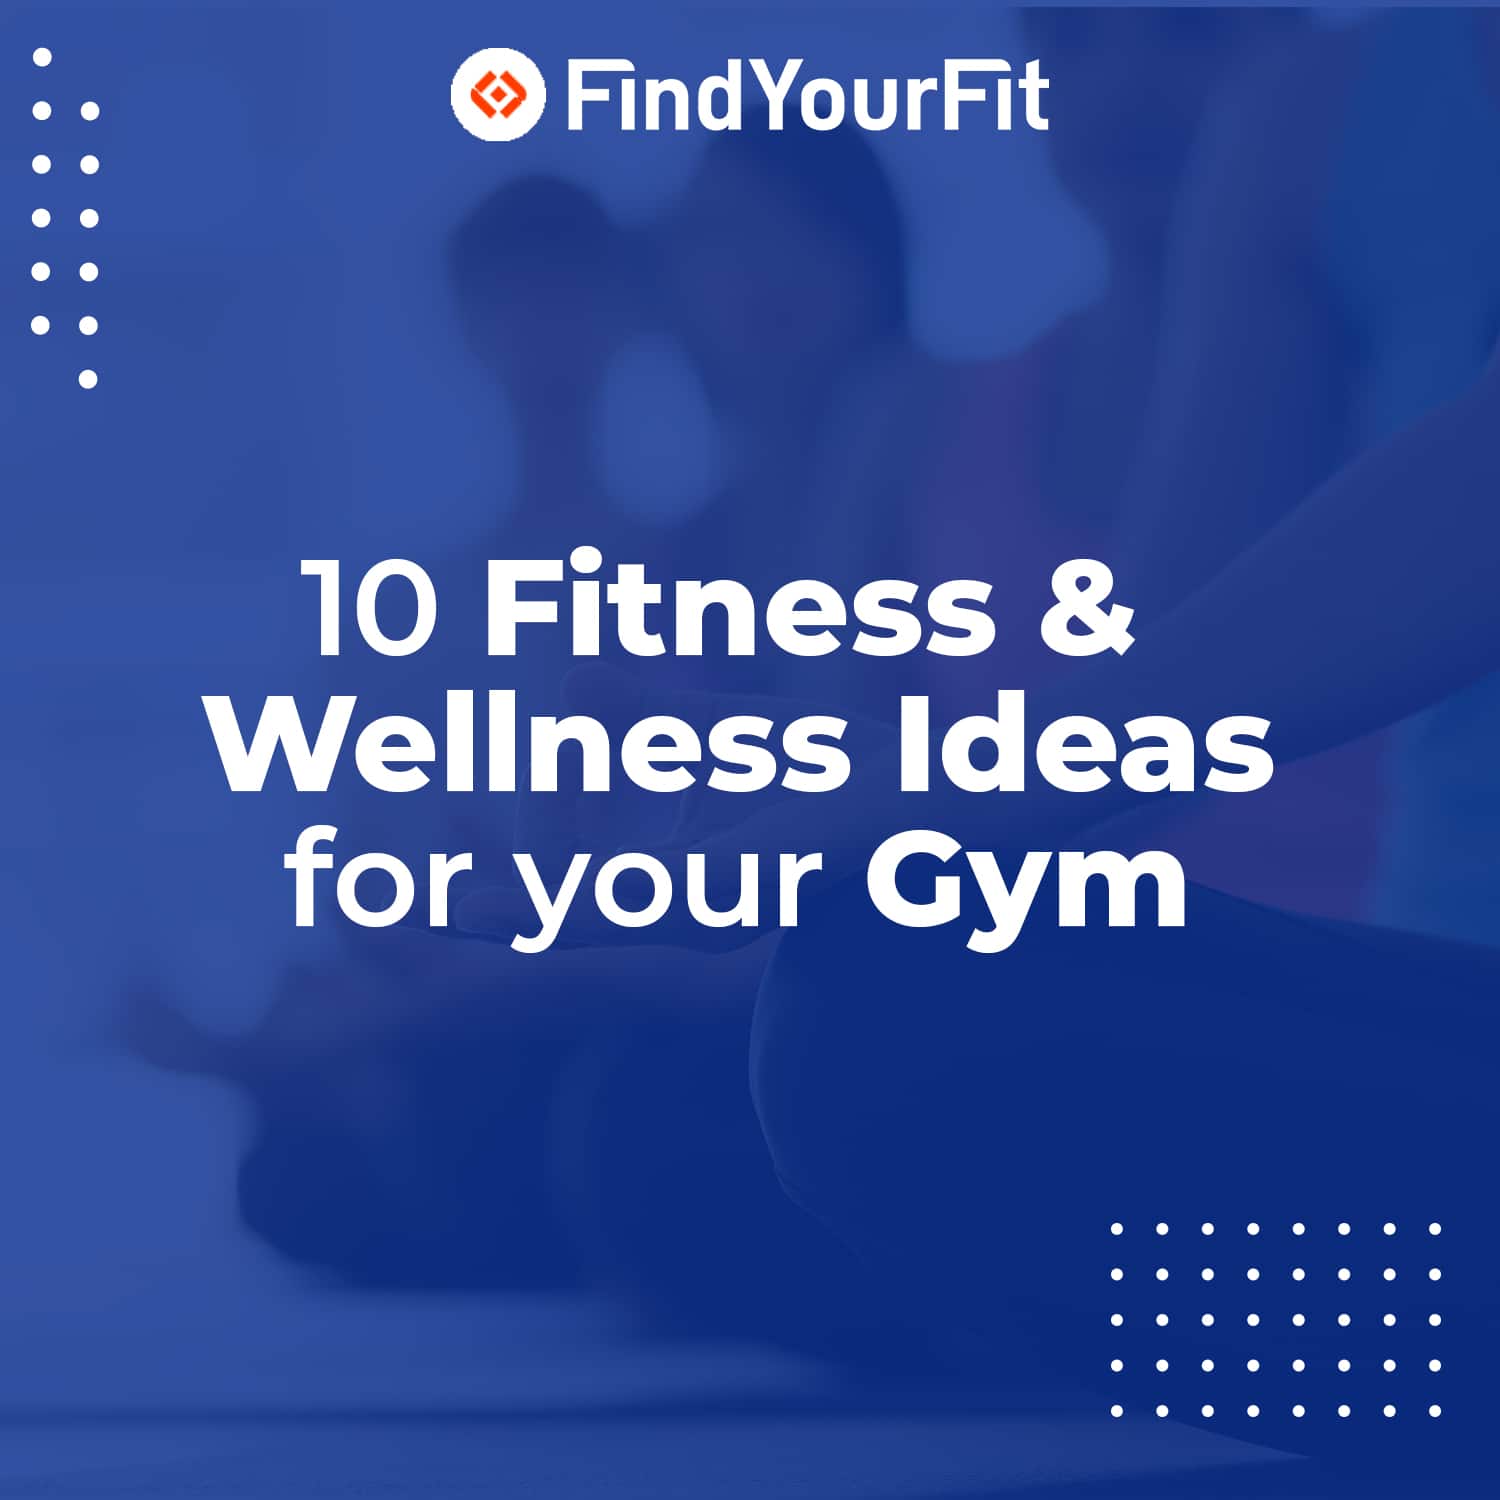 fitness event ideas for your gym